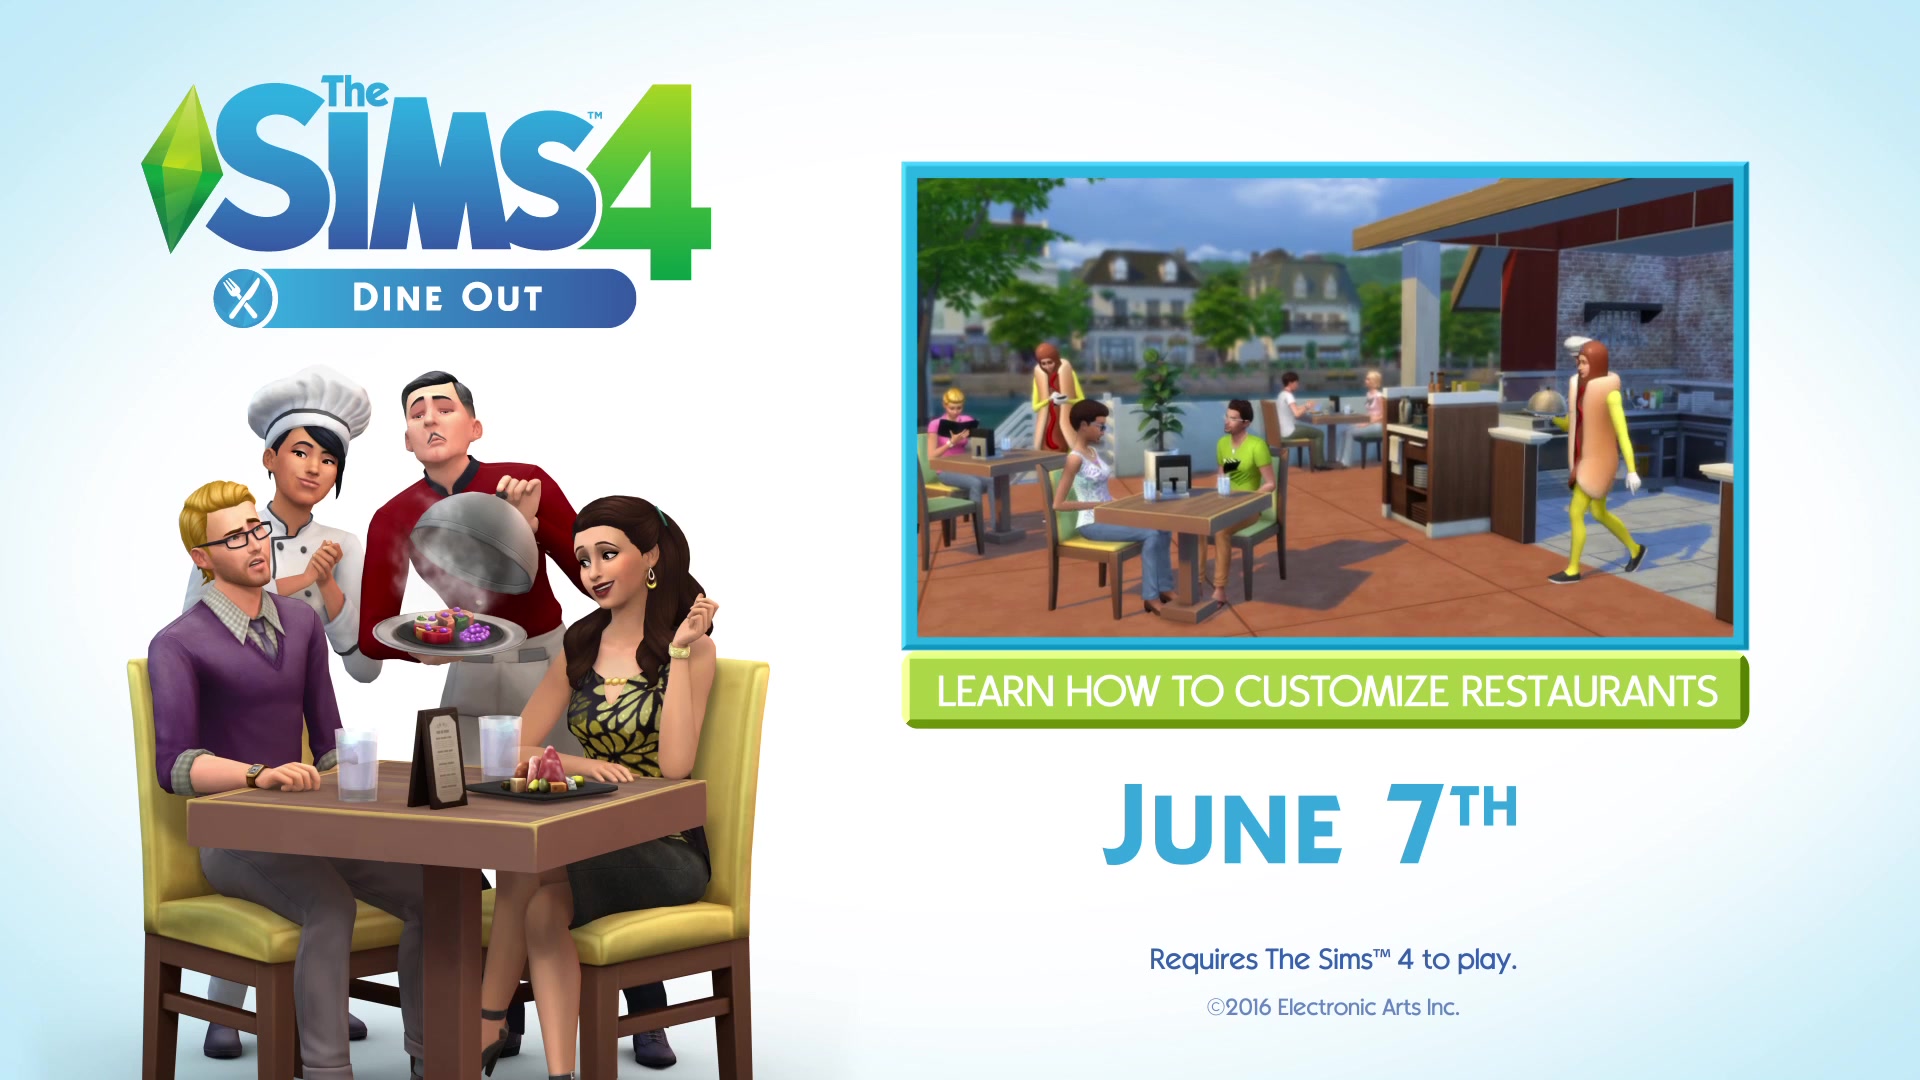 sims 3 into the future discount